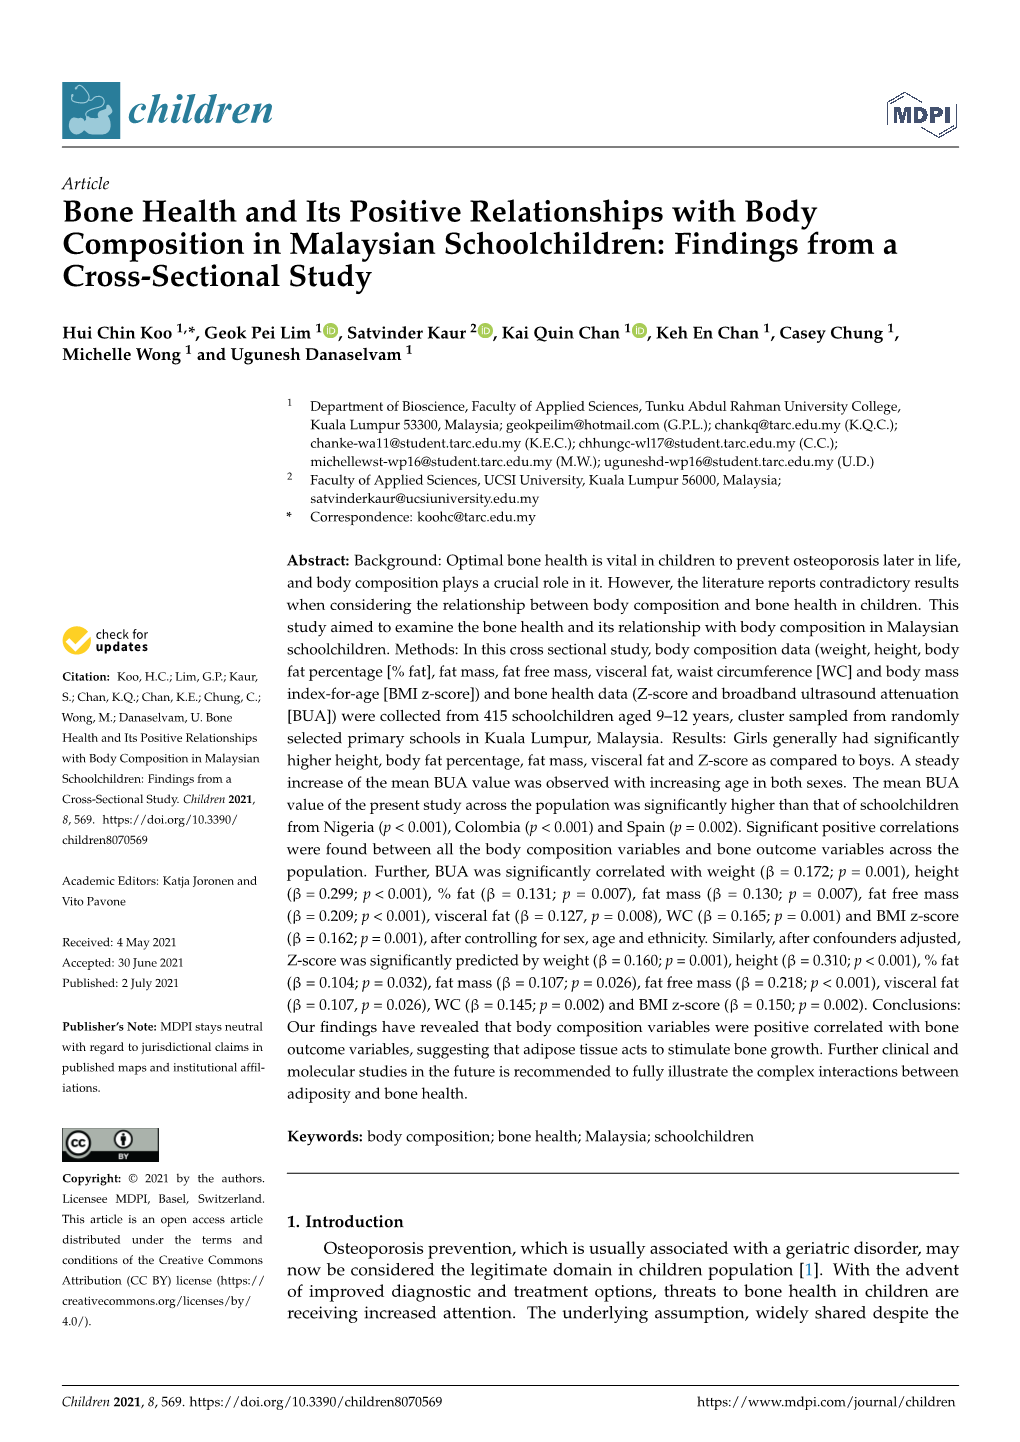 Bone Health and Its Positive Relationships with Body Composition in Malaysian Schoolchildren: Findings from a Cross-Sectional Study